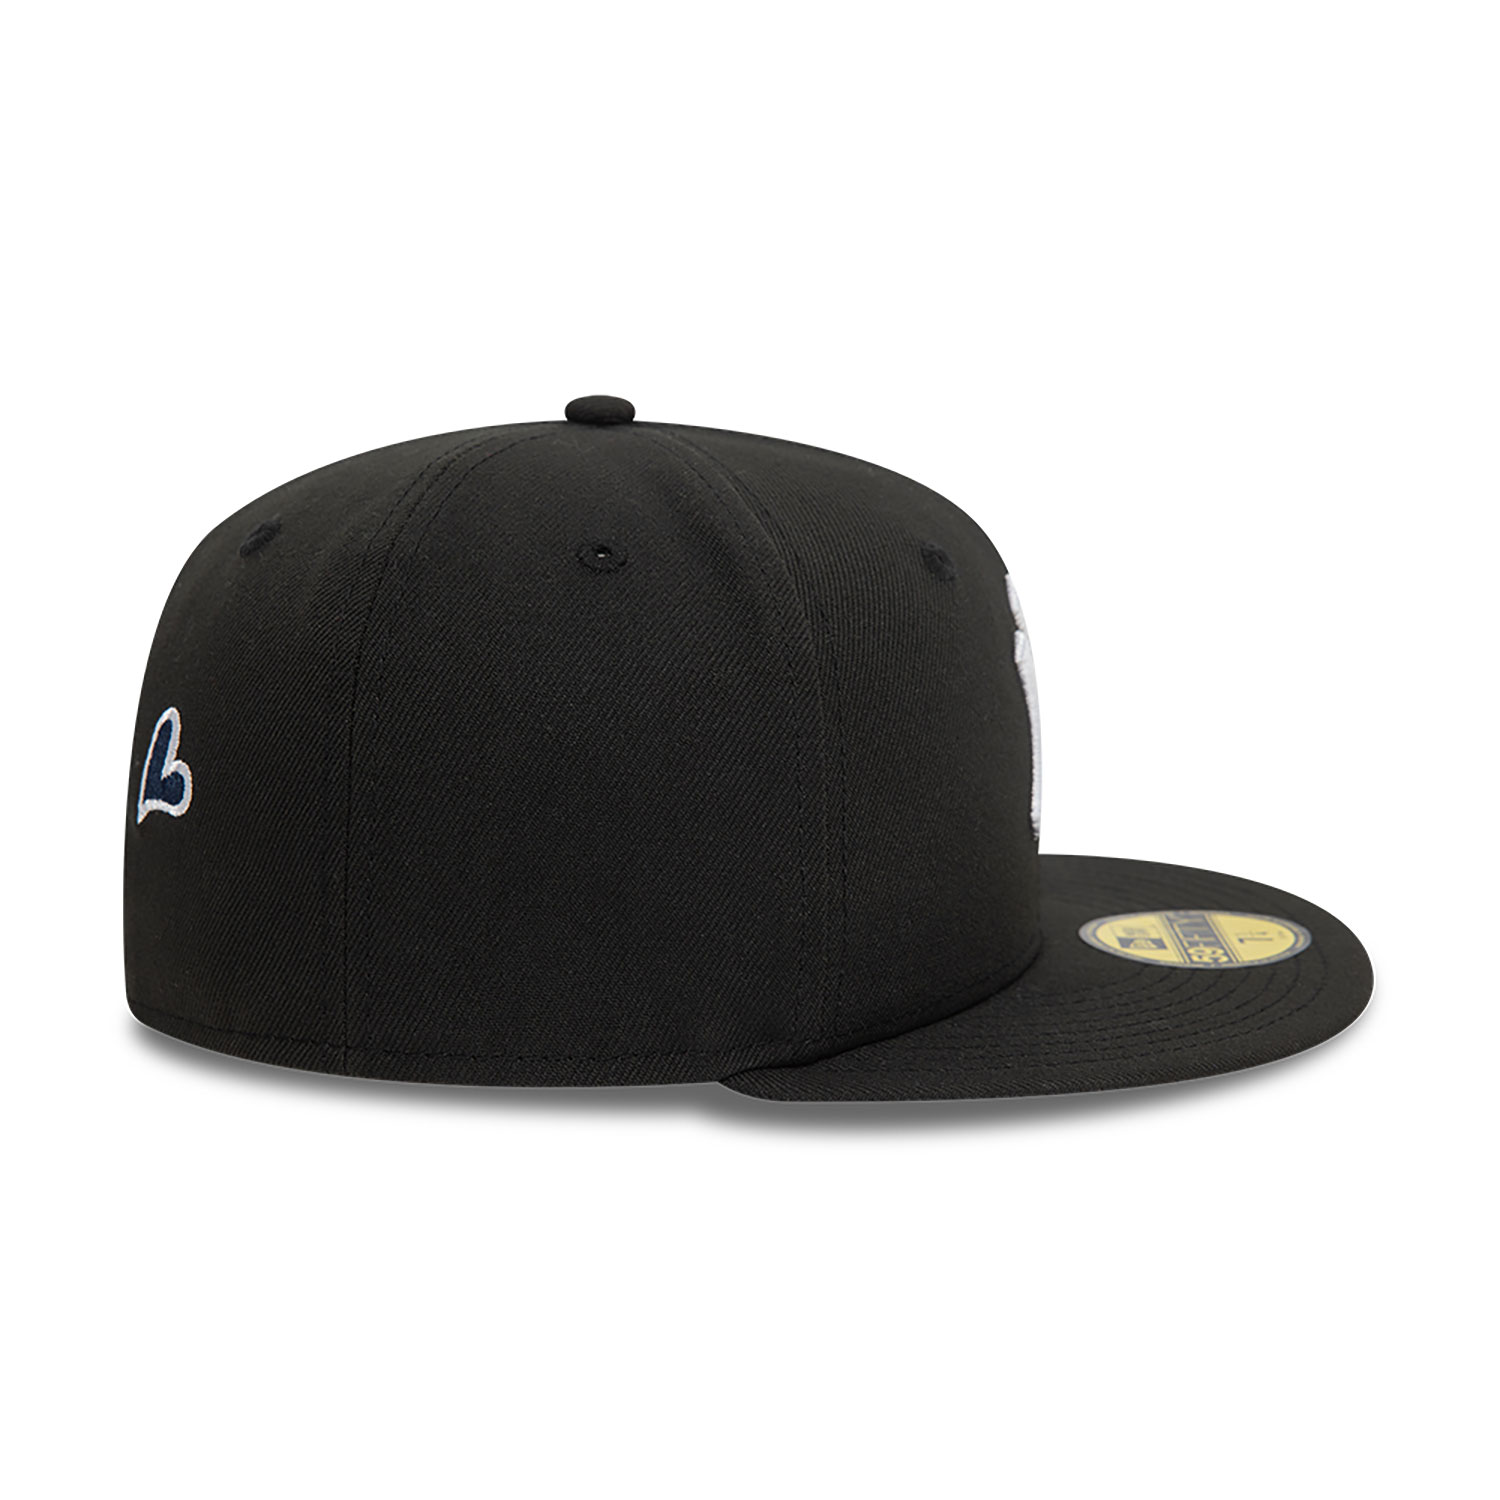 New York Yankees MLB Team Heart Black 59FIFTY Fitted Cap